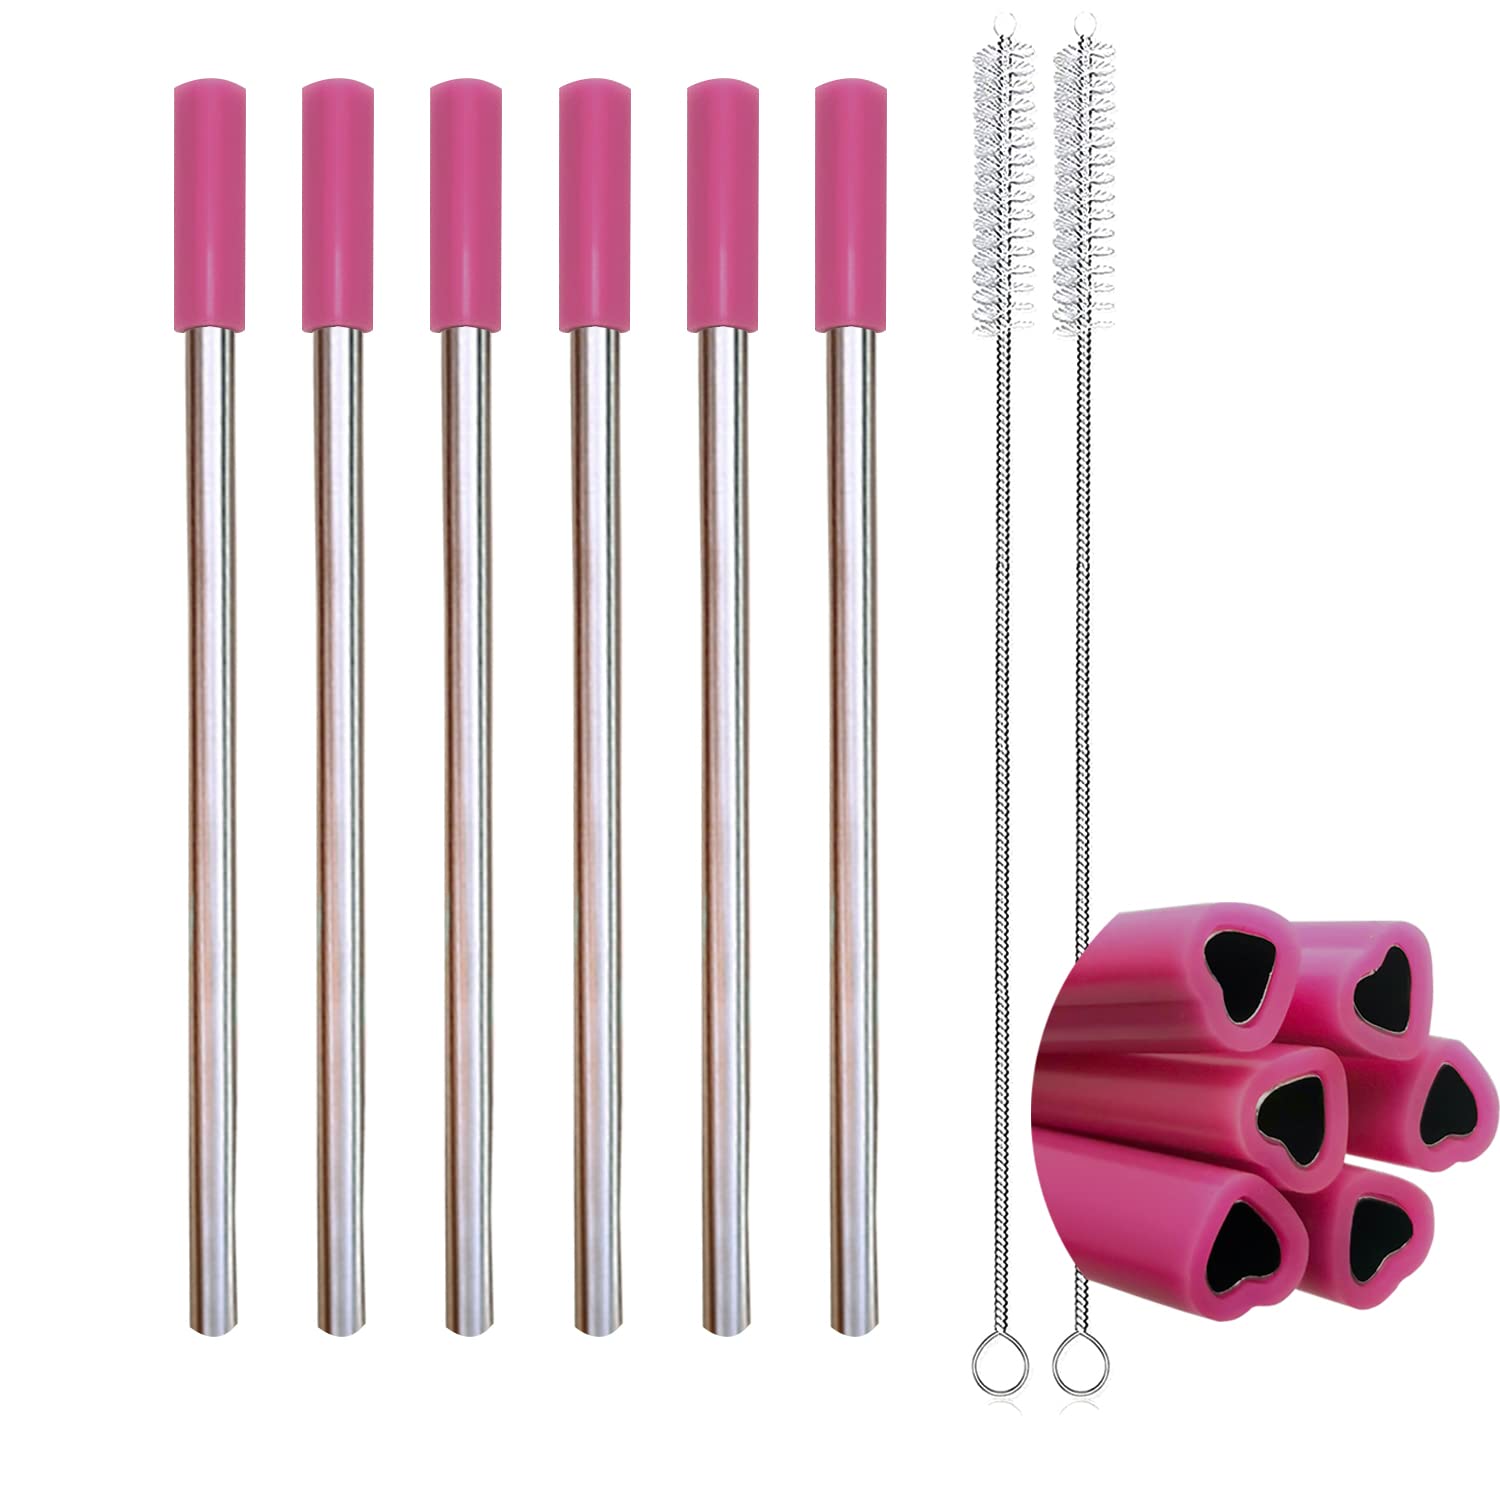 Amsthow Cute Metal Straws 6Pcs Heart Shaped Straws Reusable Stainless Steel Straw with Silicone Tip and Cleaning Brushes for Shakes, Drinking (Silver)